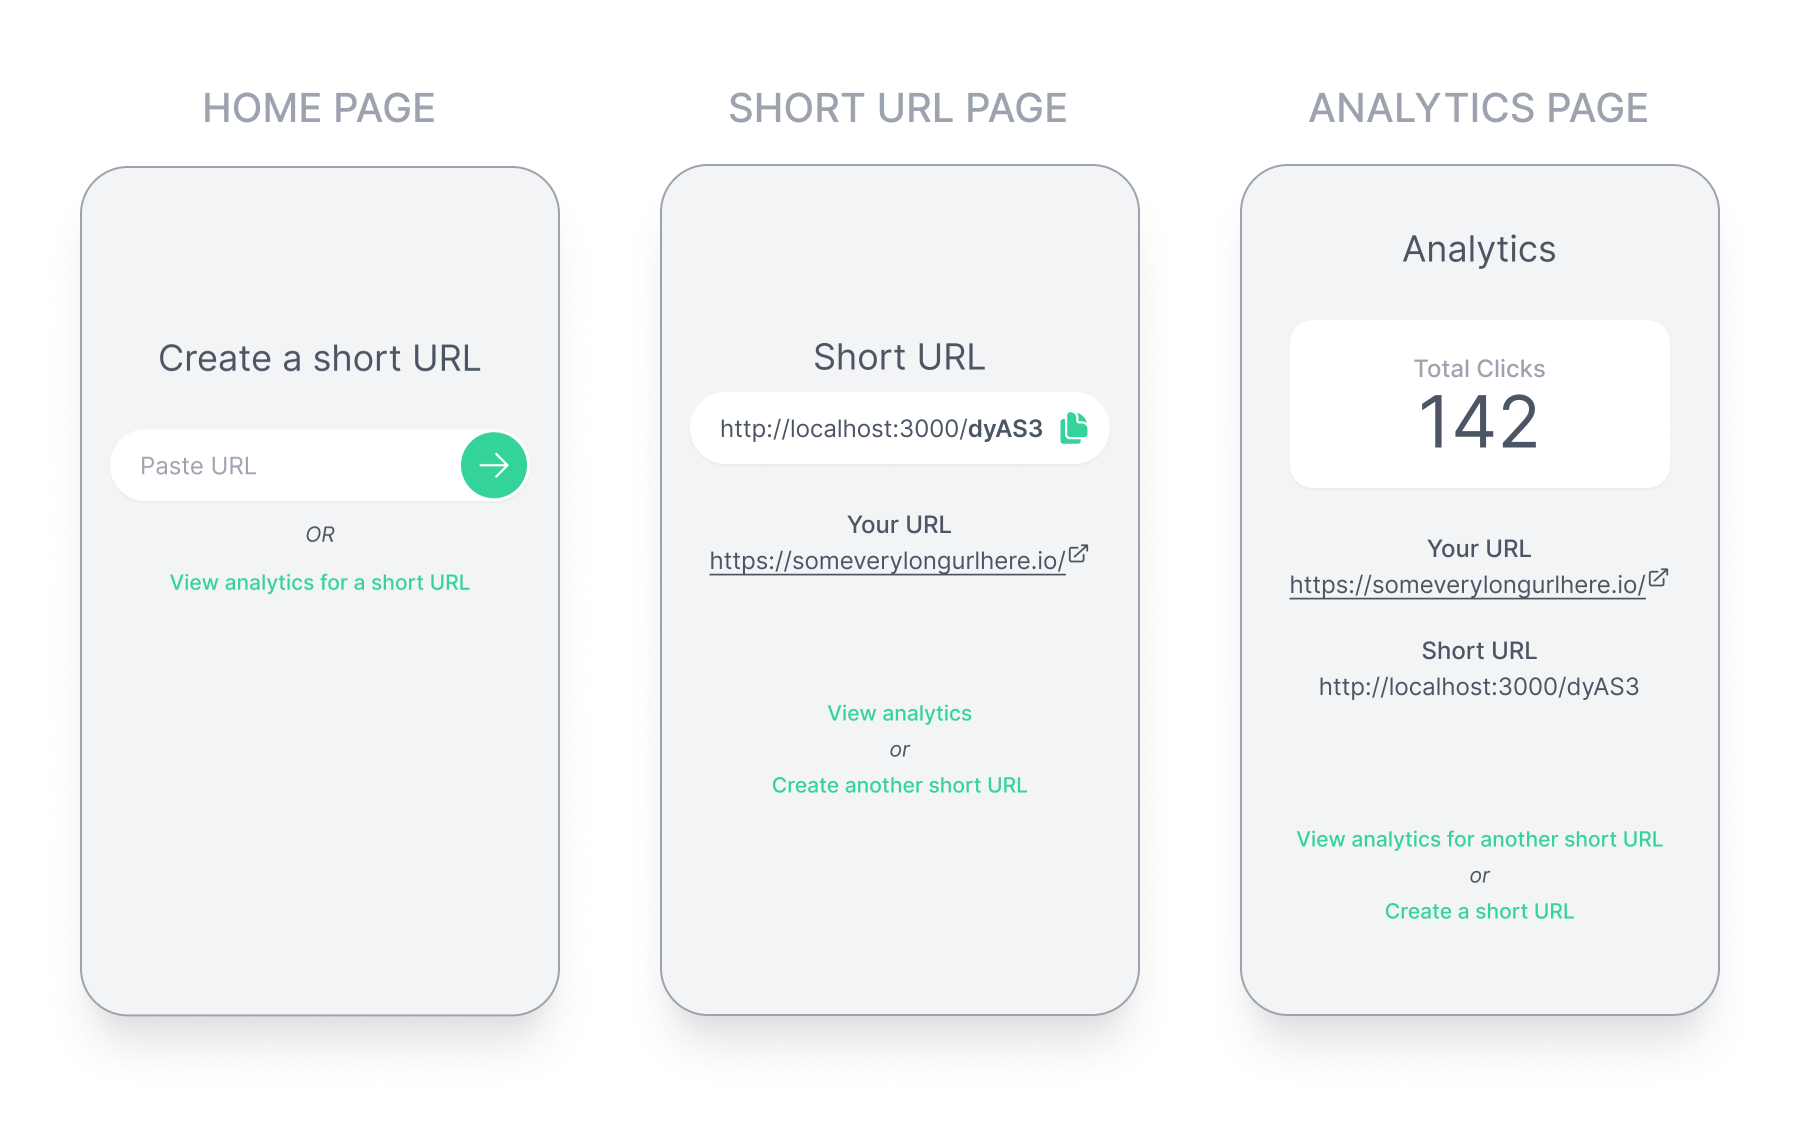 Application screenshots of the home, short URL and analytics page on mobile.